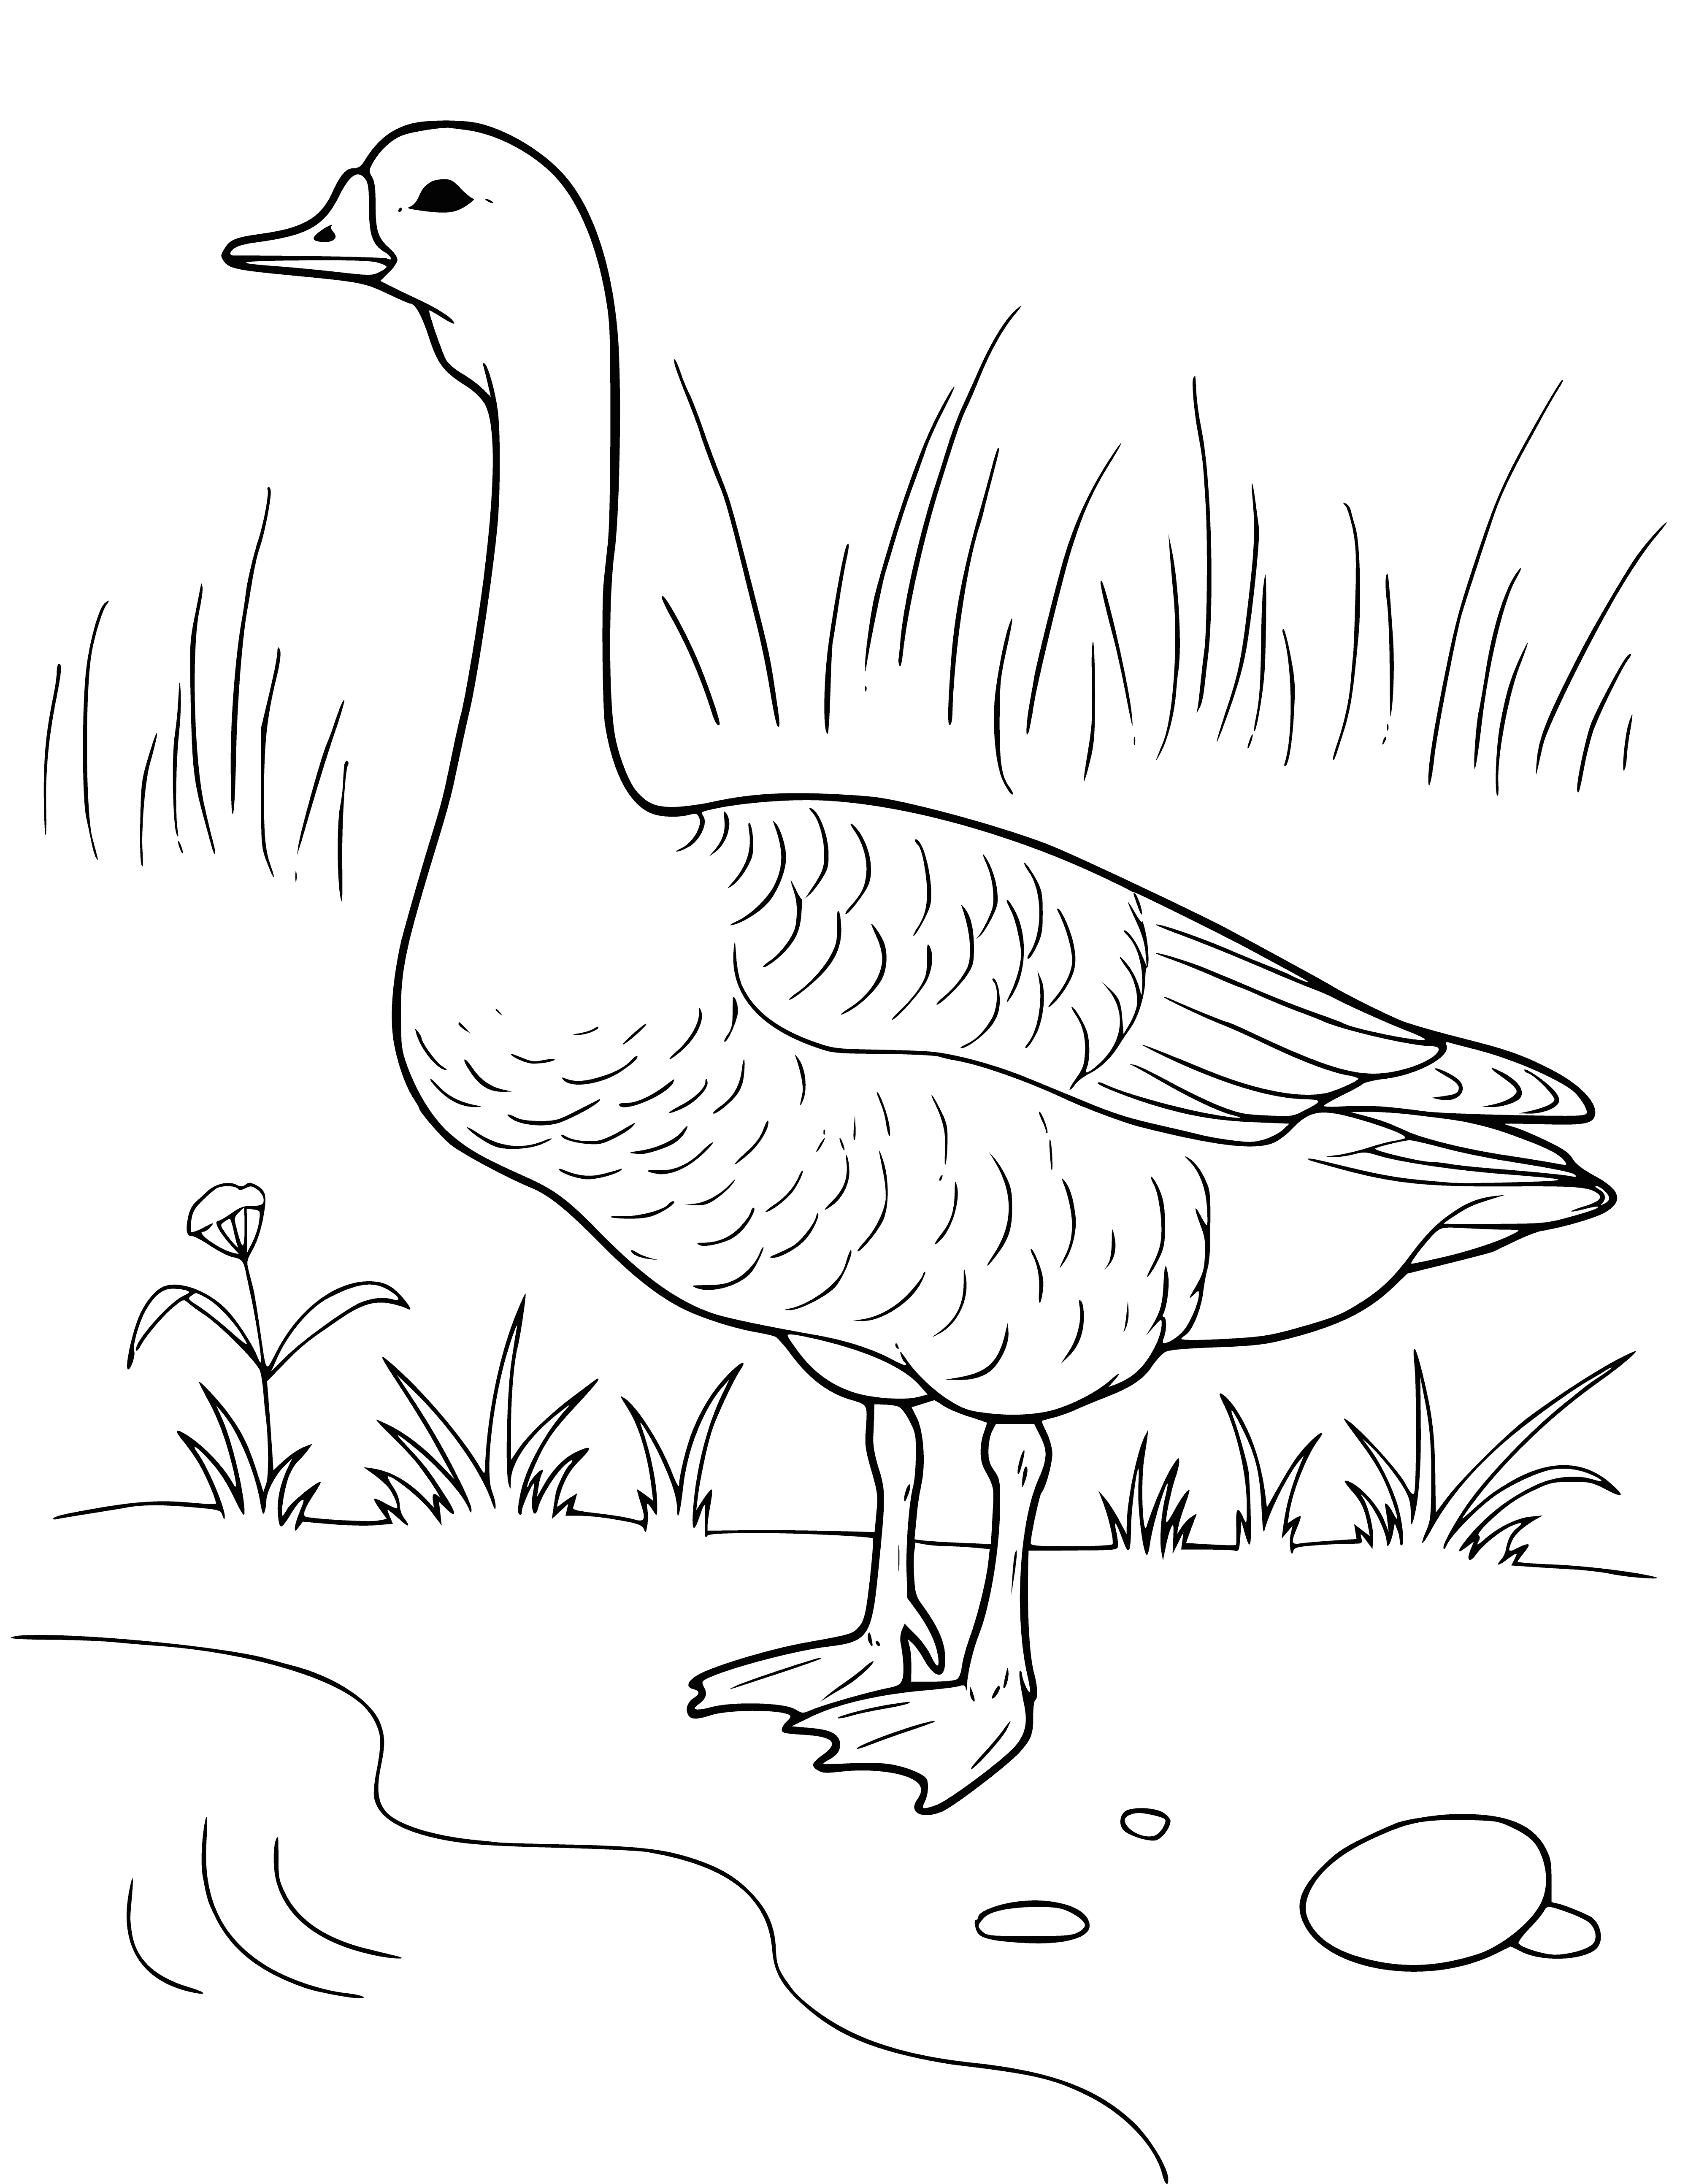 coloring page: A goose is a waterbird with brownish body, white belly, and gray wings with black stripes. Sharp bill curves down. Long neck and webbed feet.